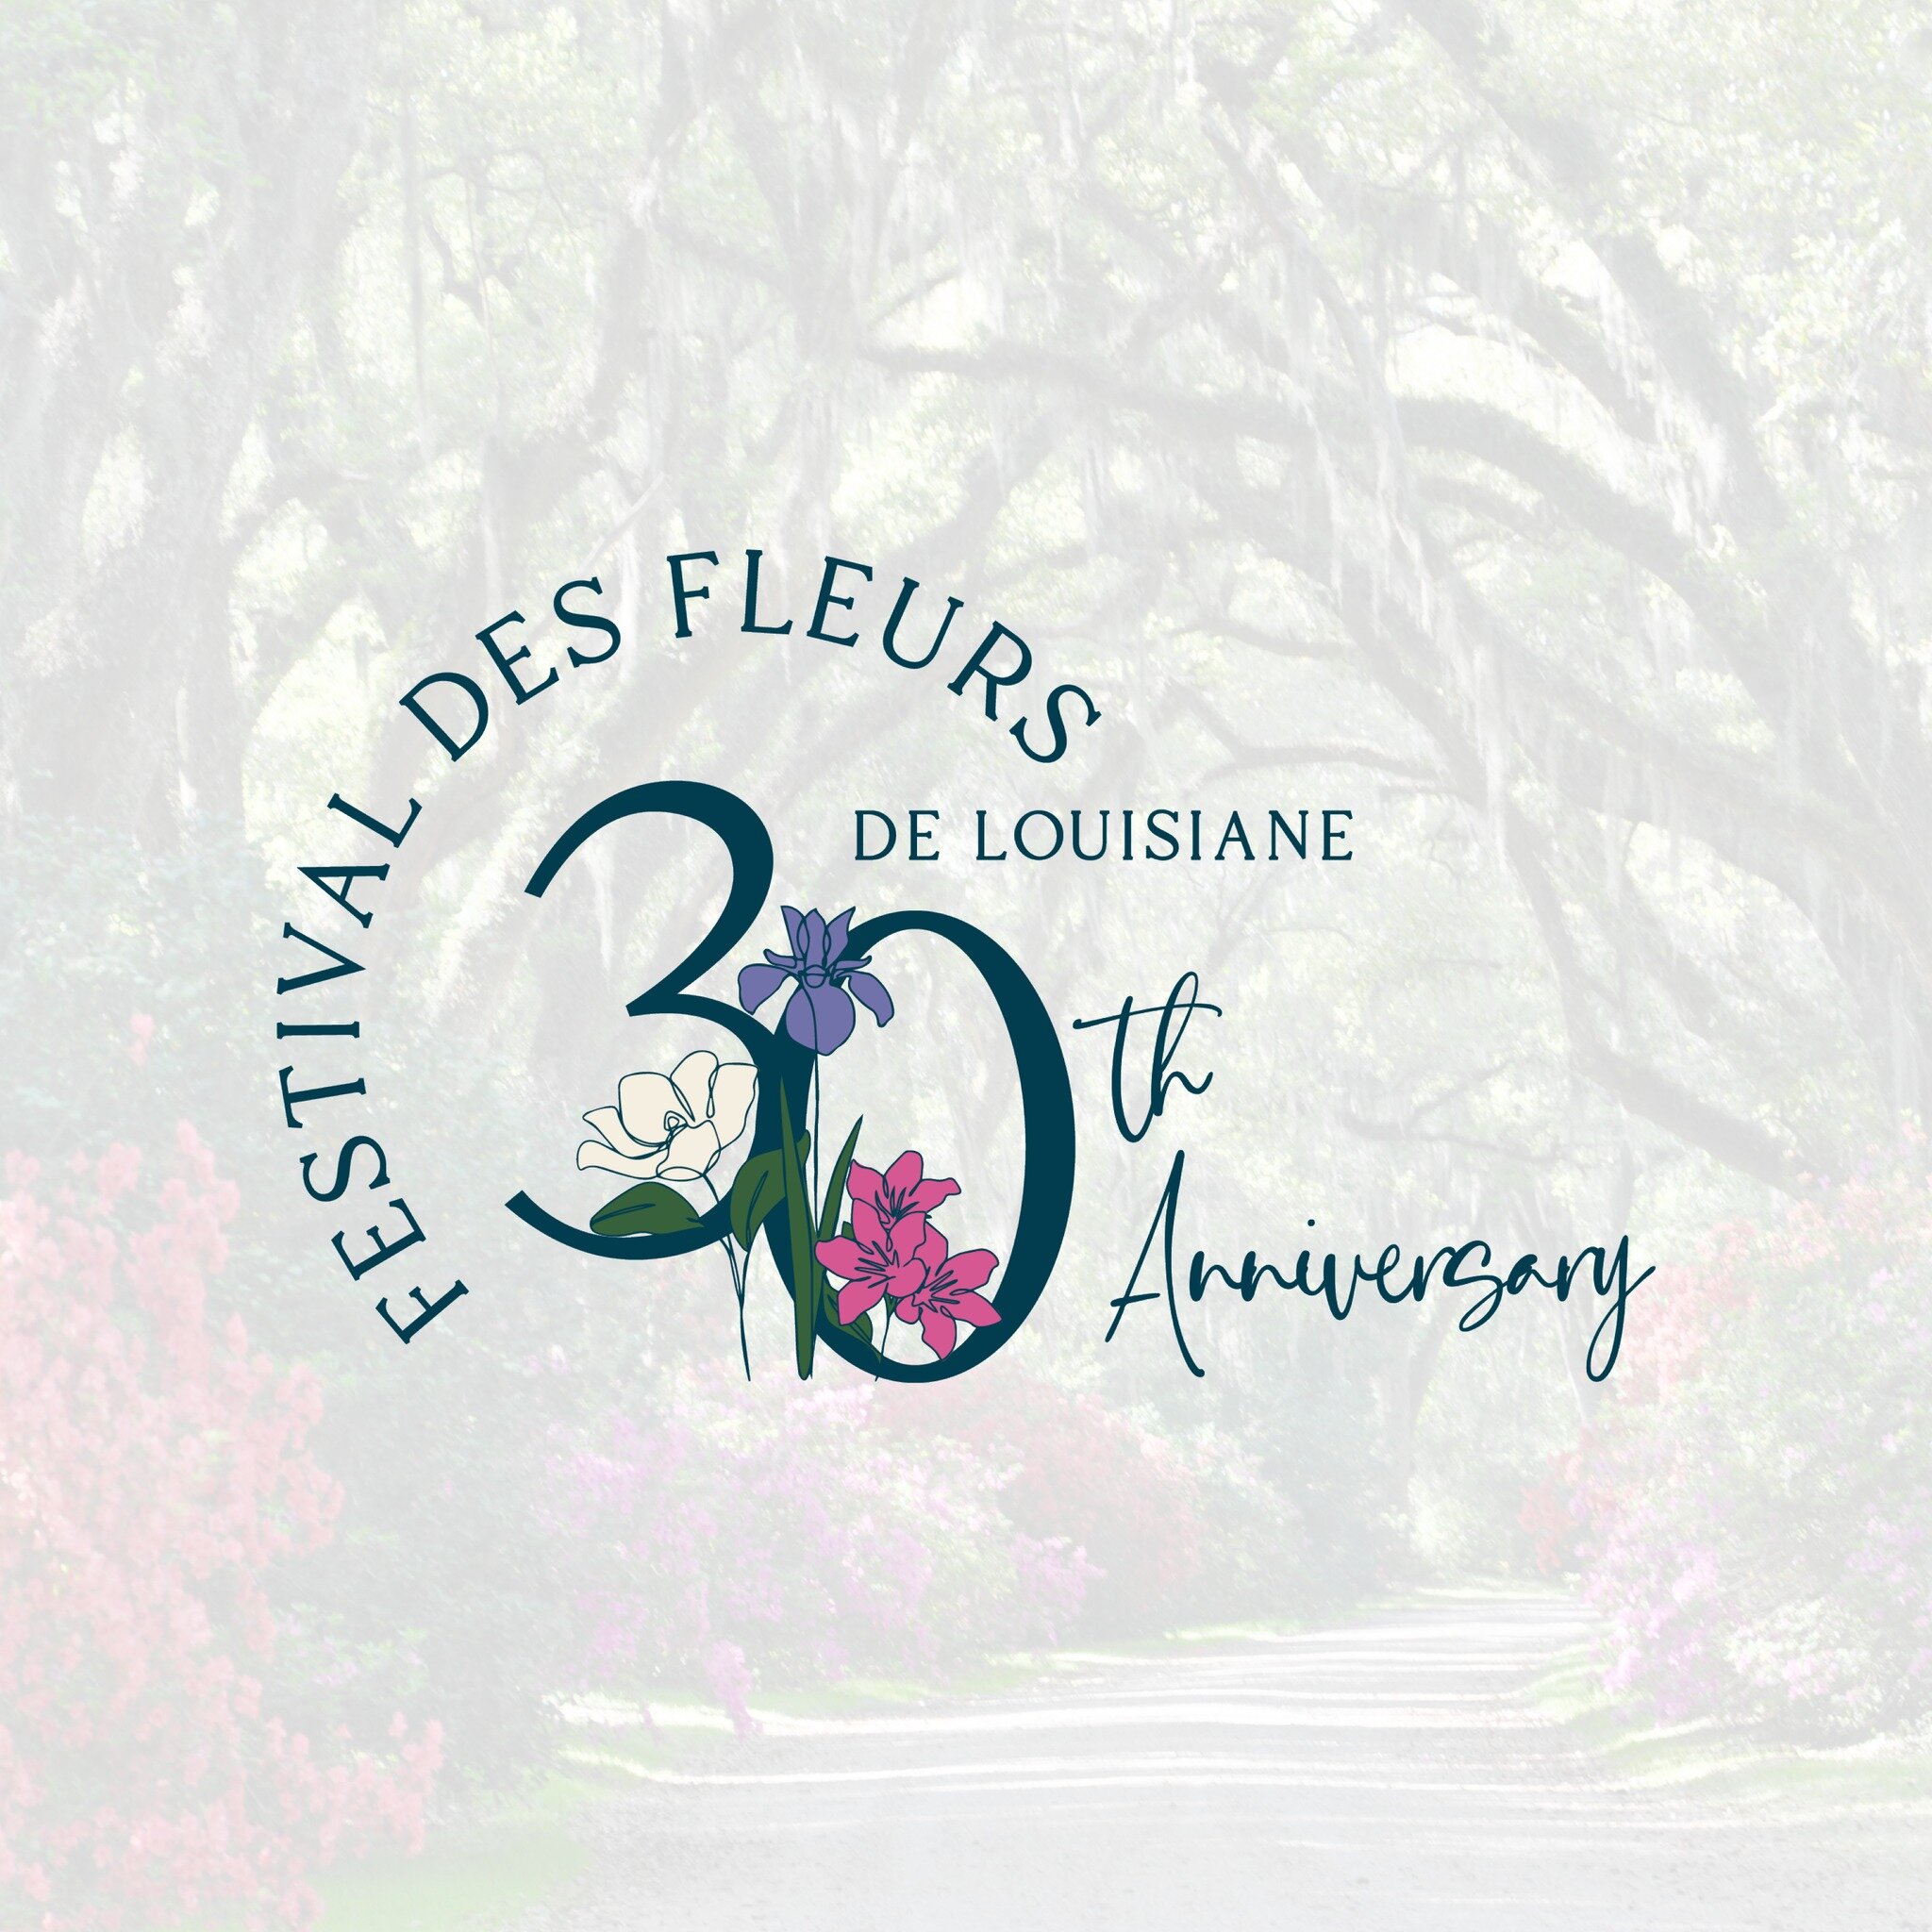 Festival des Fleurs de Louisiane was an institution that was losing its audience as it approached its 30th anniversary. They called CDC in for help and we began a long and fruitful process, starting with a total brand overhaul. Once a new logo was ch